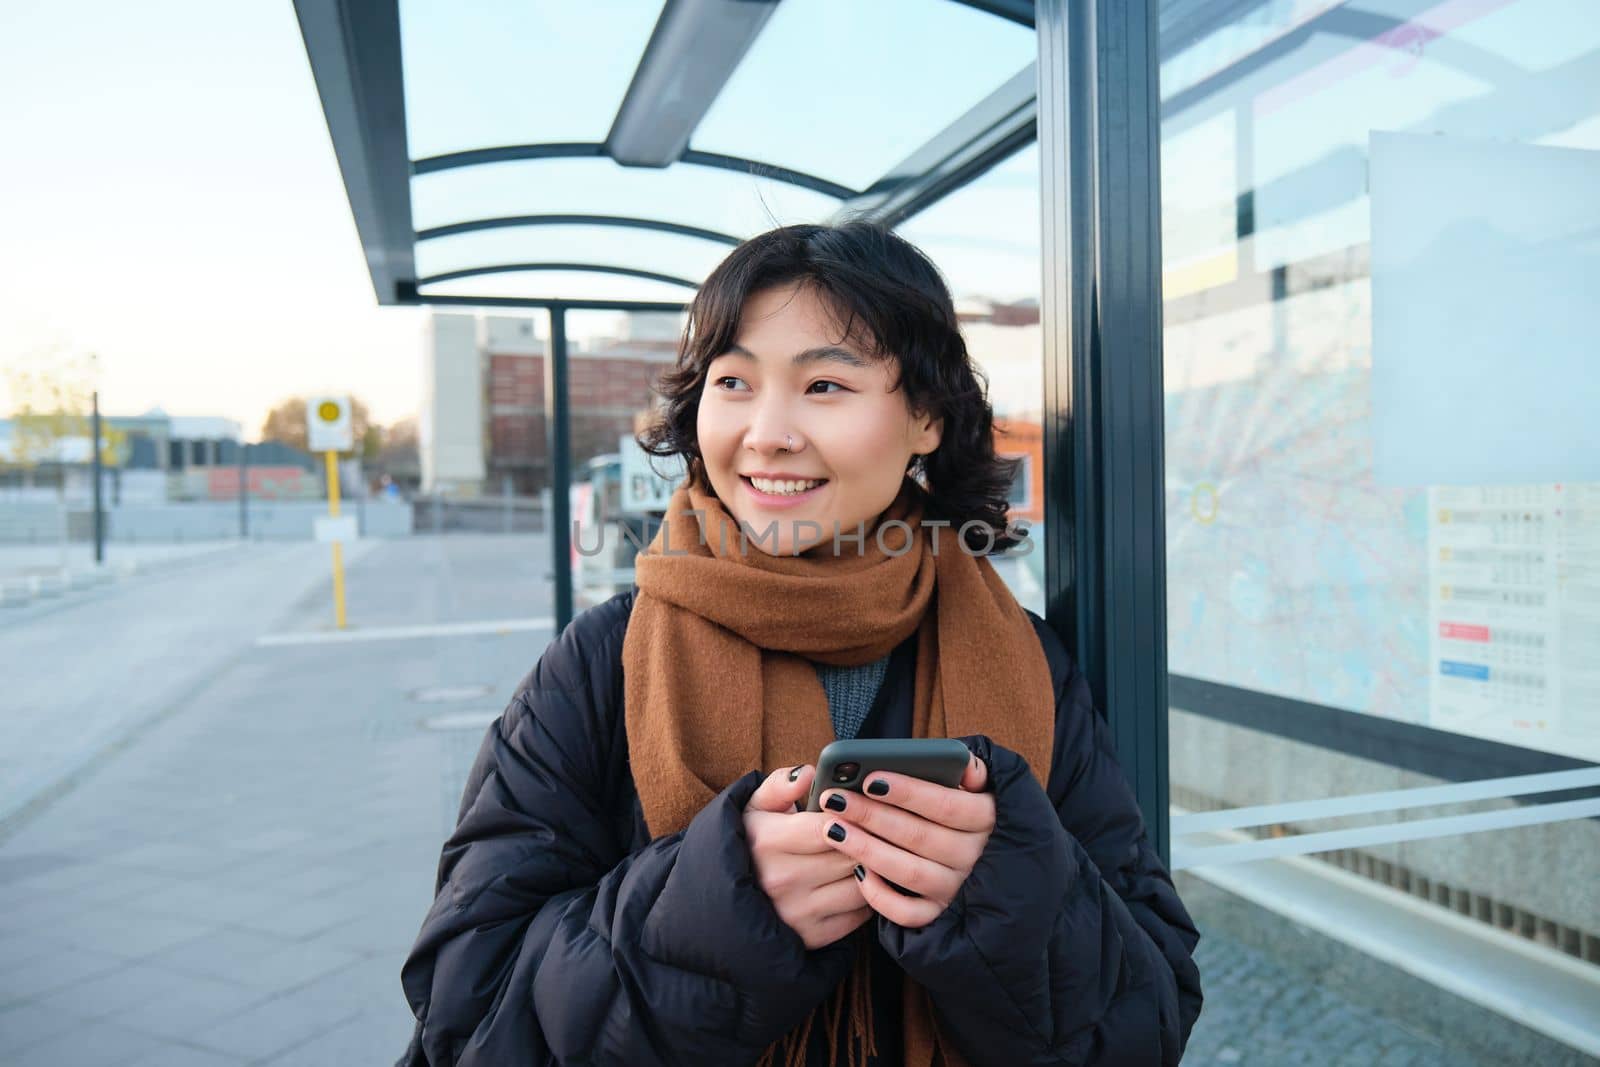 Portrait of Korean woman in winter jacket, standing with smartphone, waiting for bus on stop, looking at mobile phone app checking public transport application.